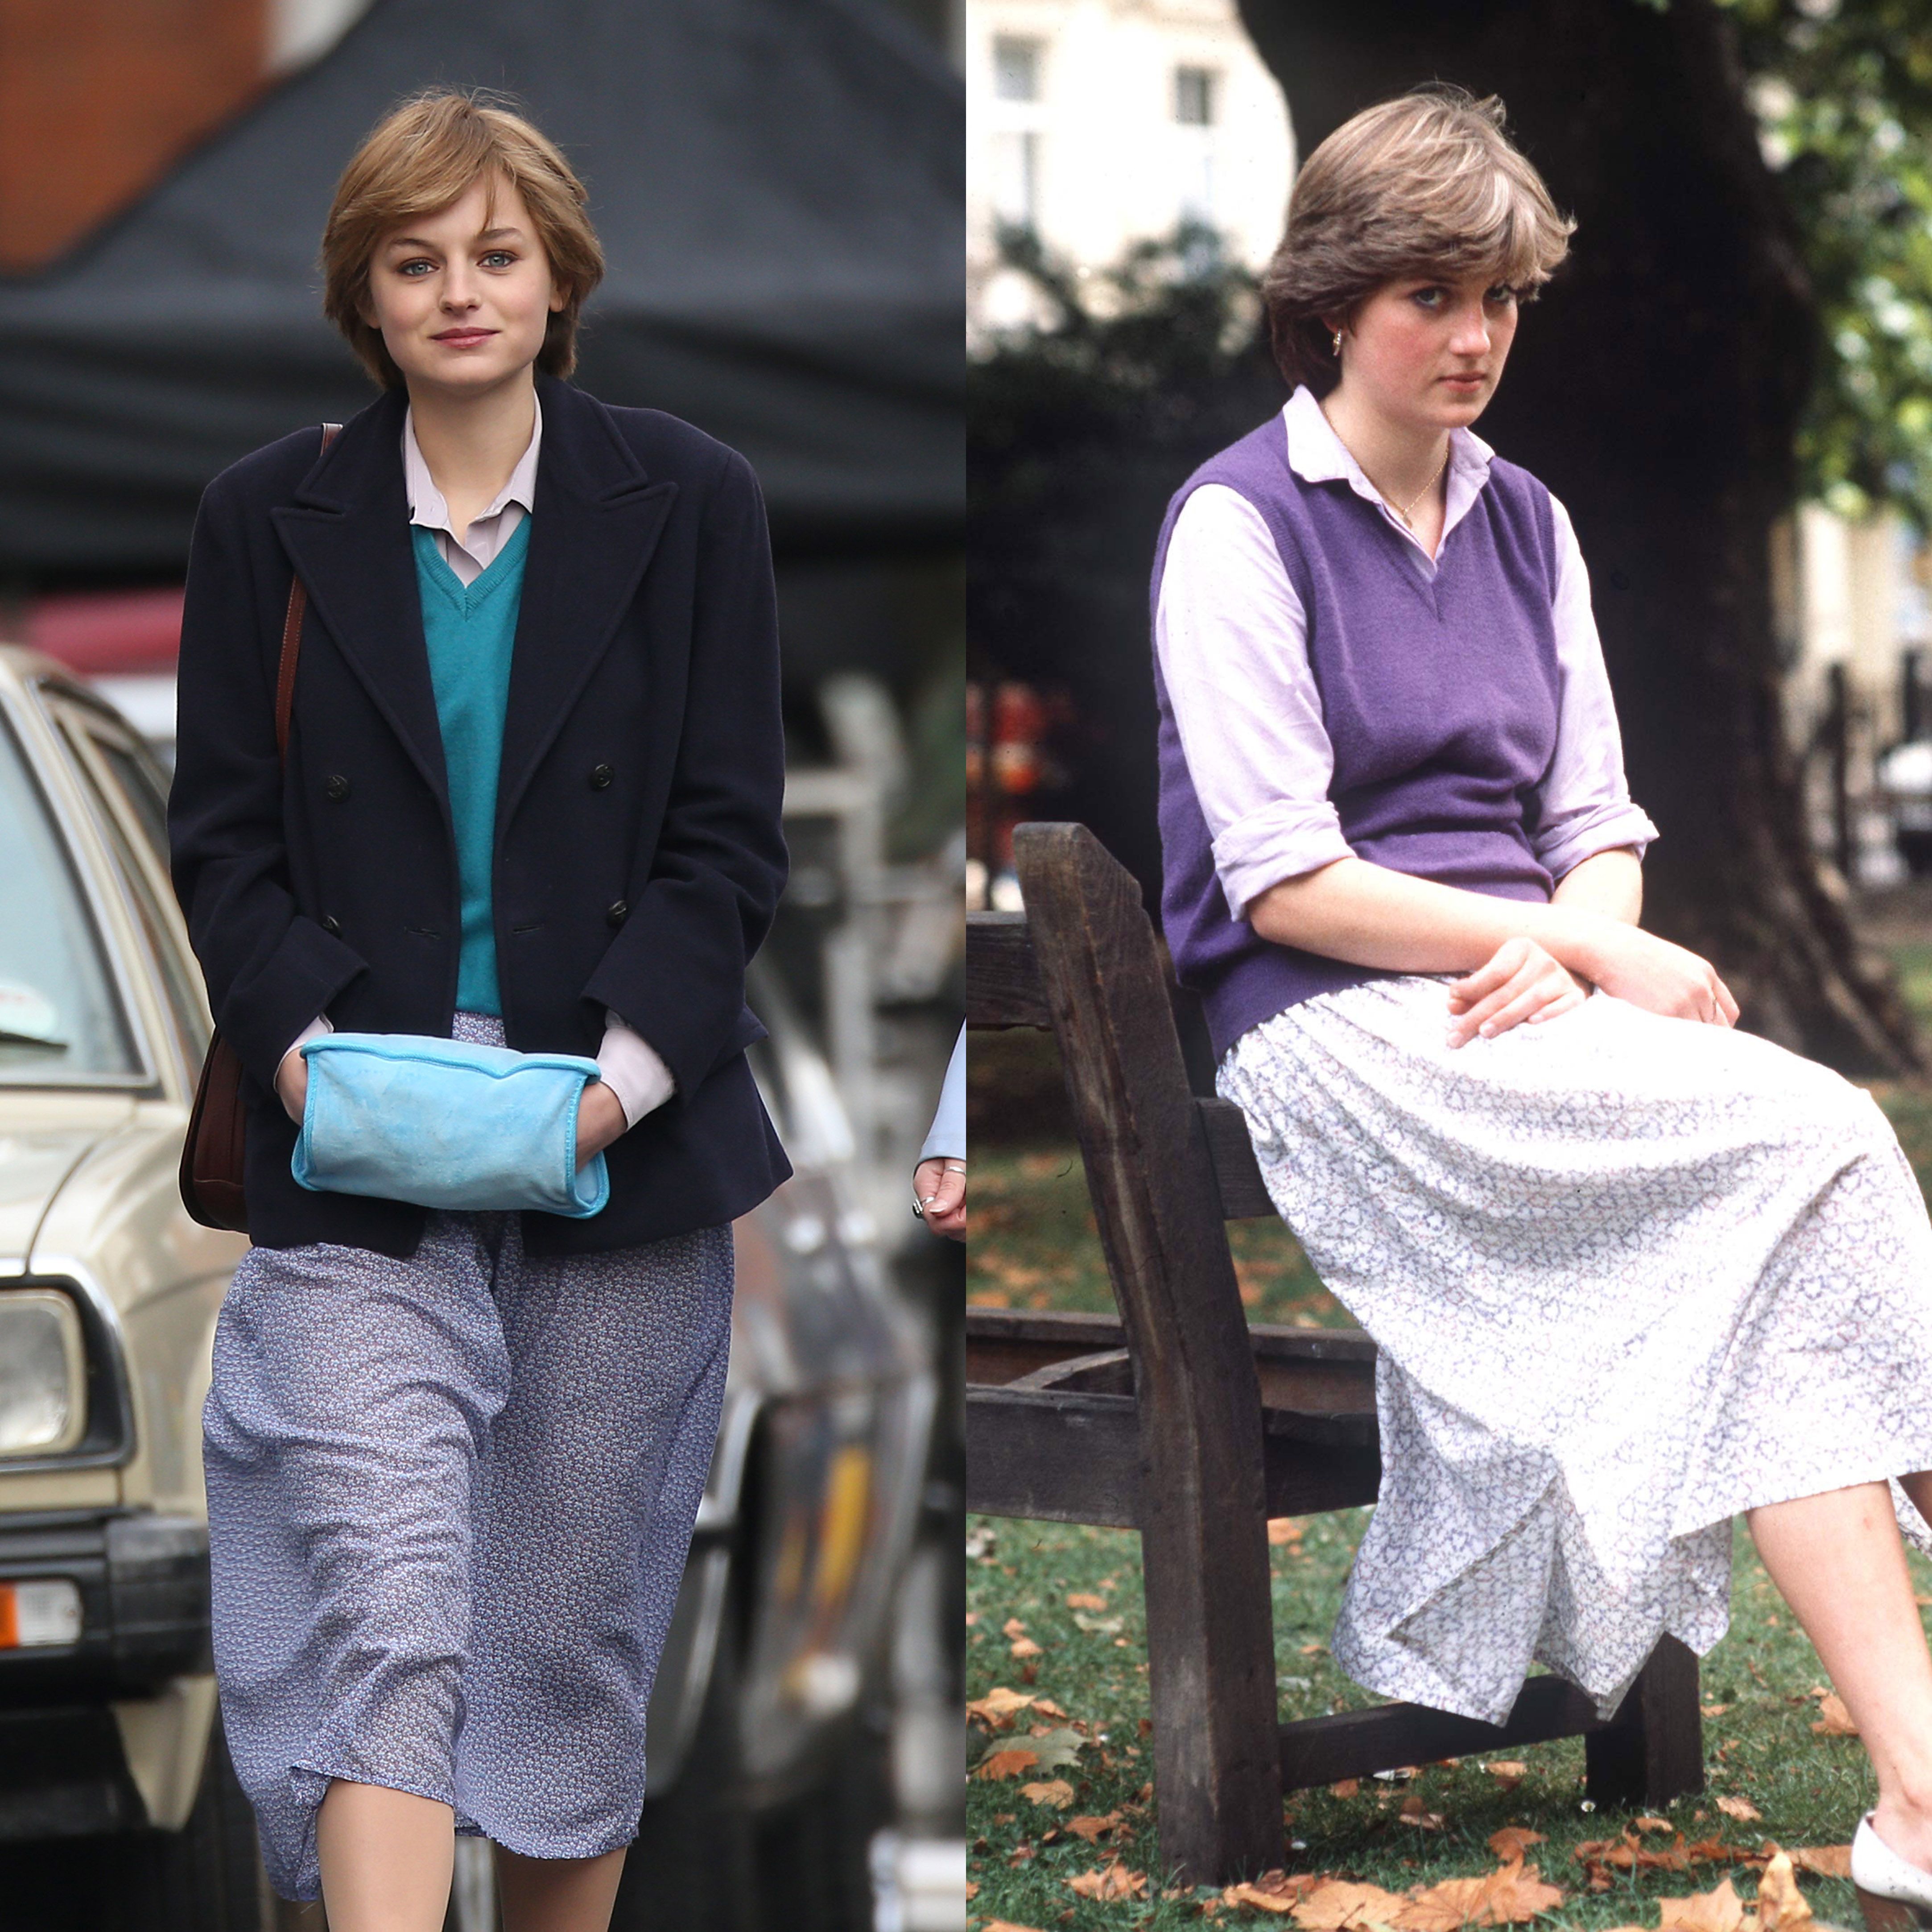 Princess Diana Wearing Her Bags From The Crown in Real Life